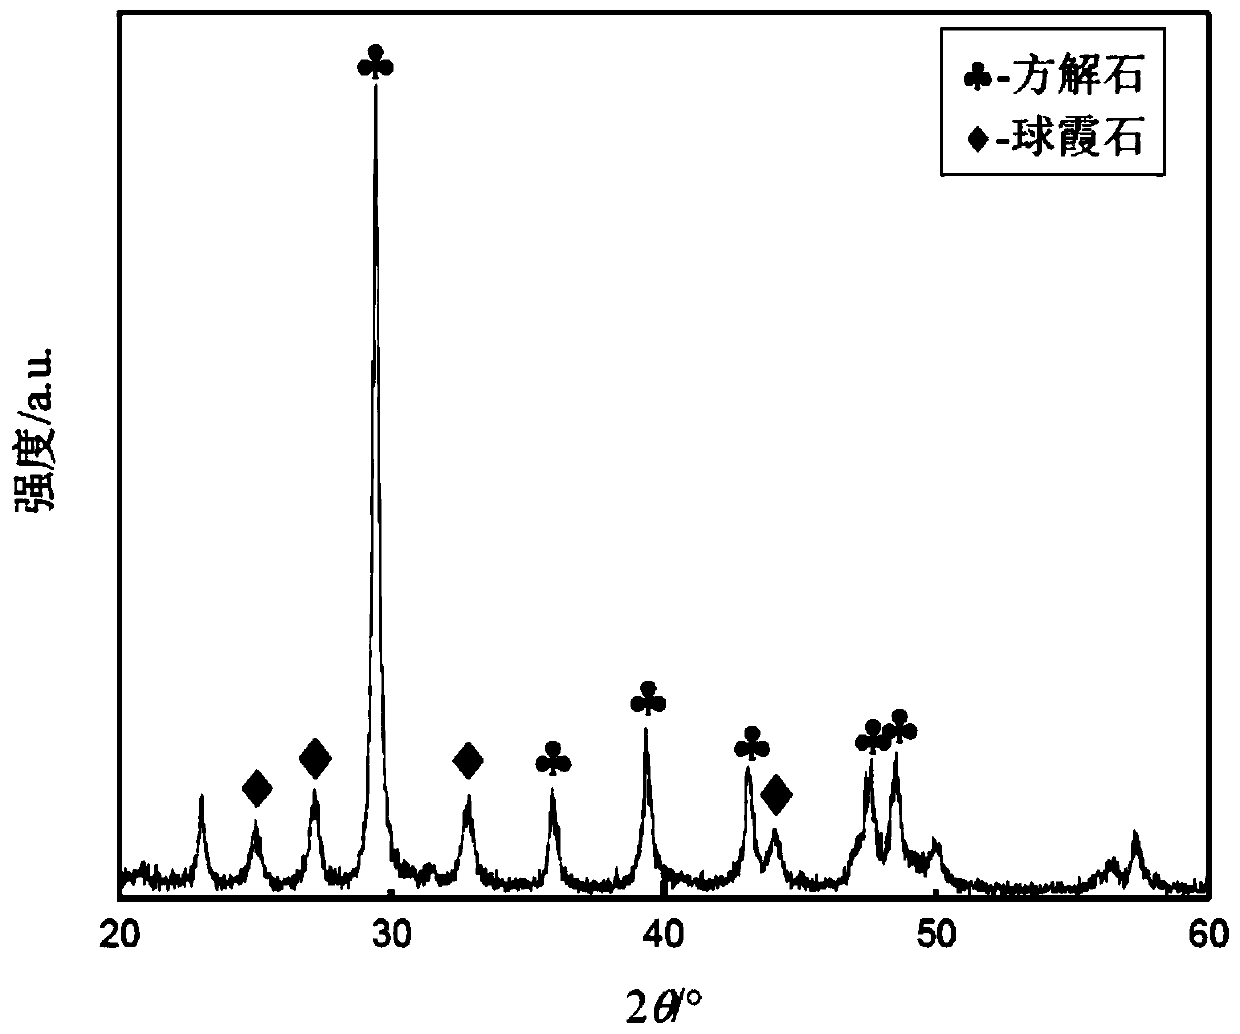 Method for preparing carbonate powder by smelting wastes by using stainless steel